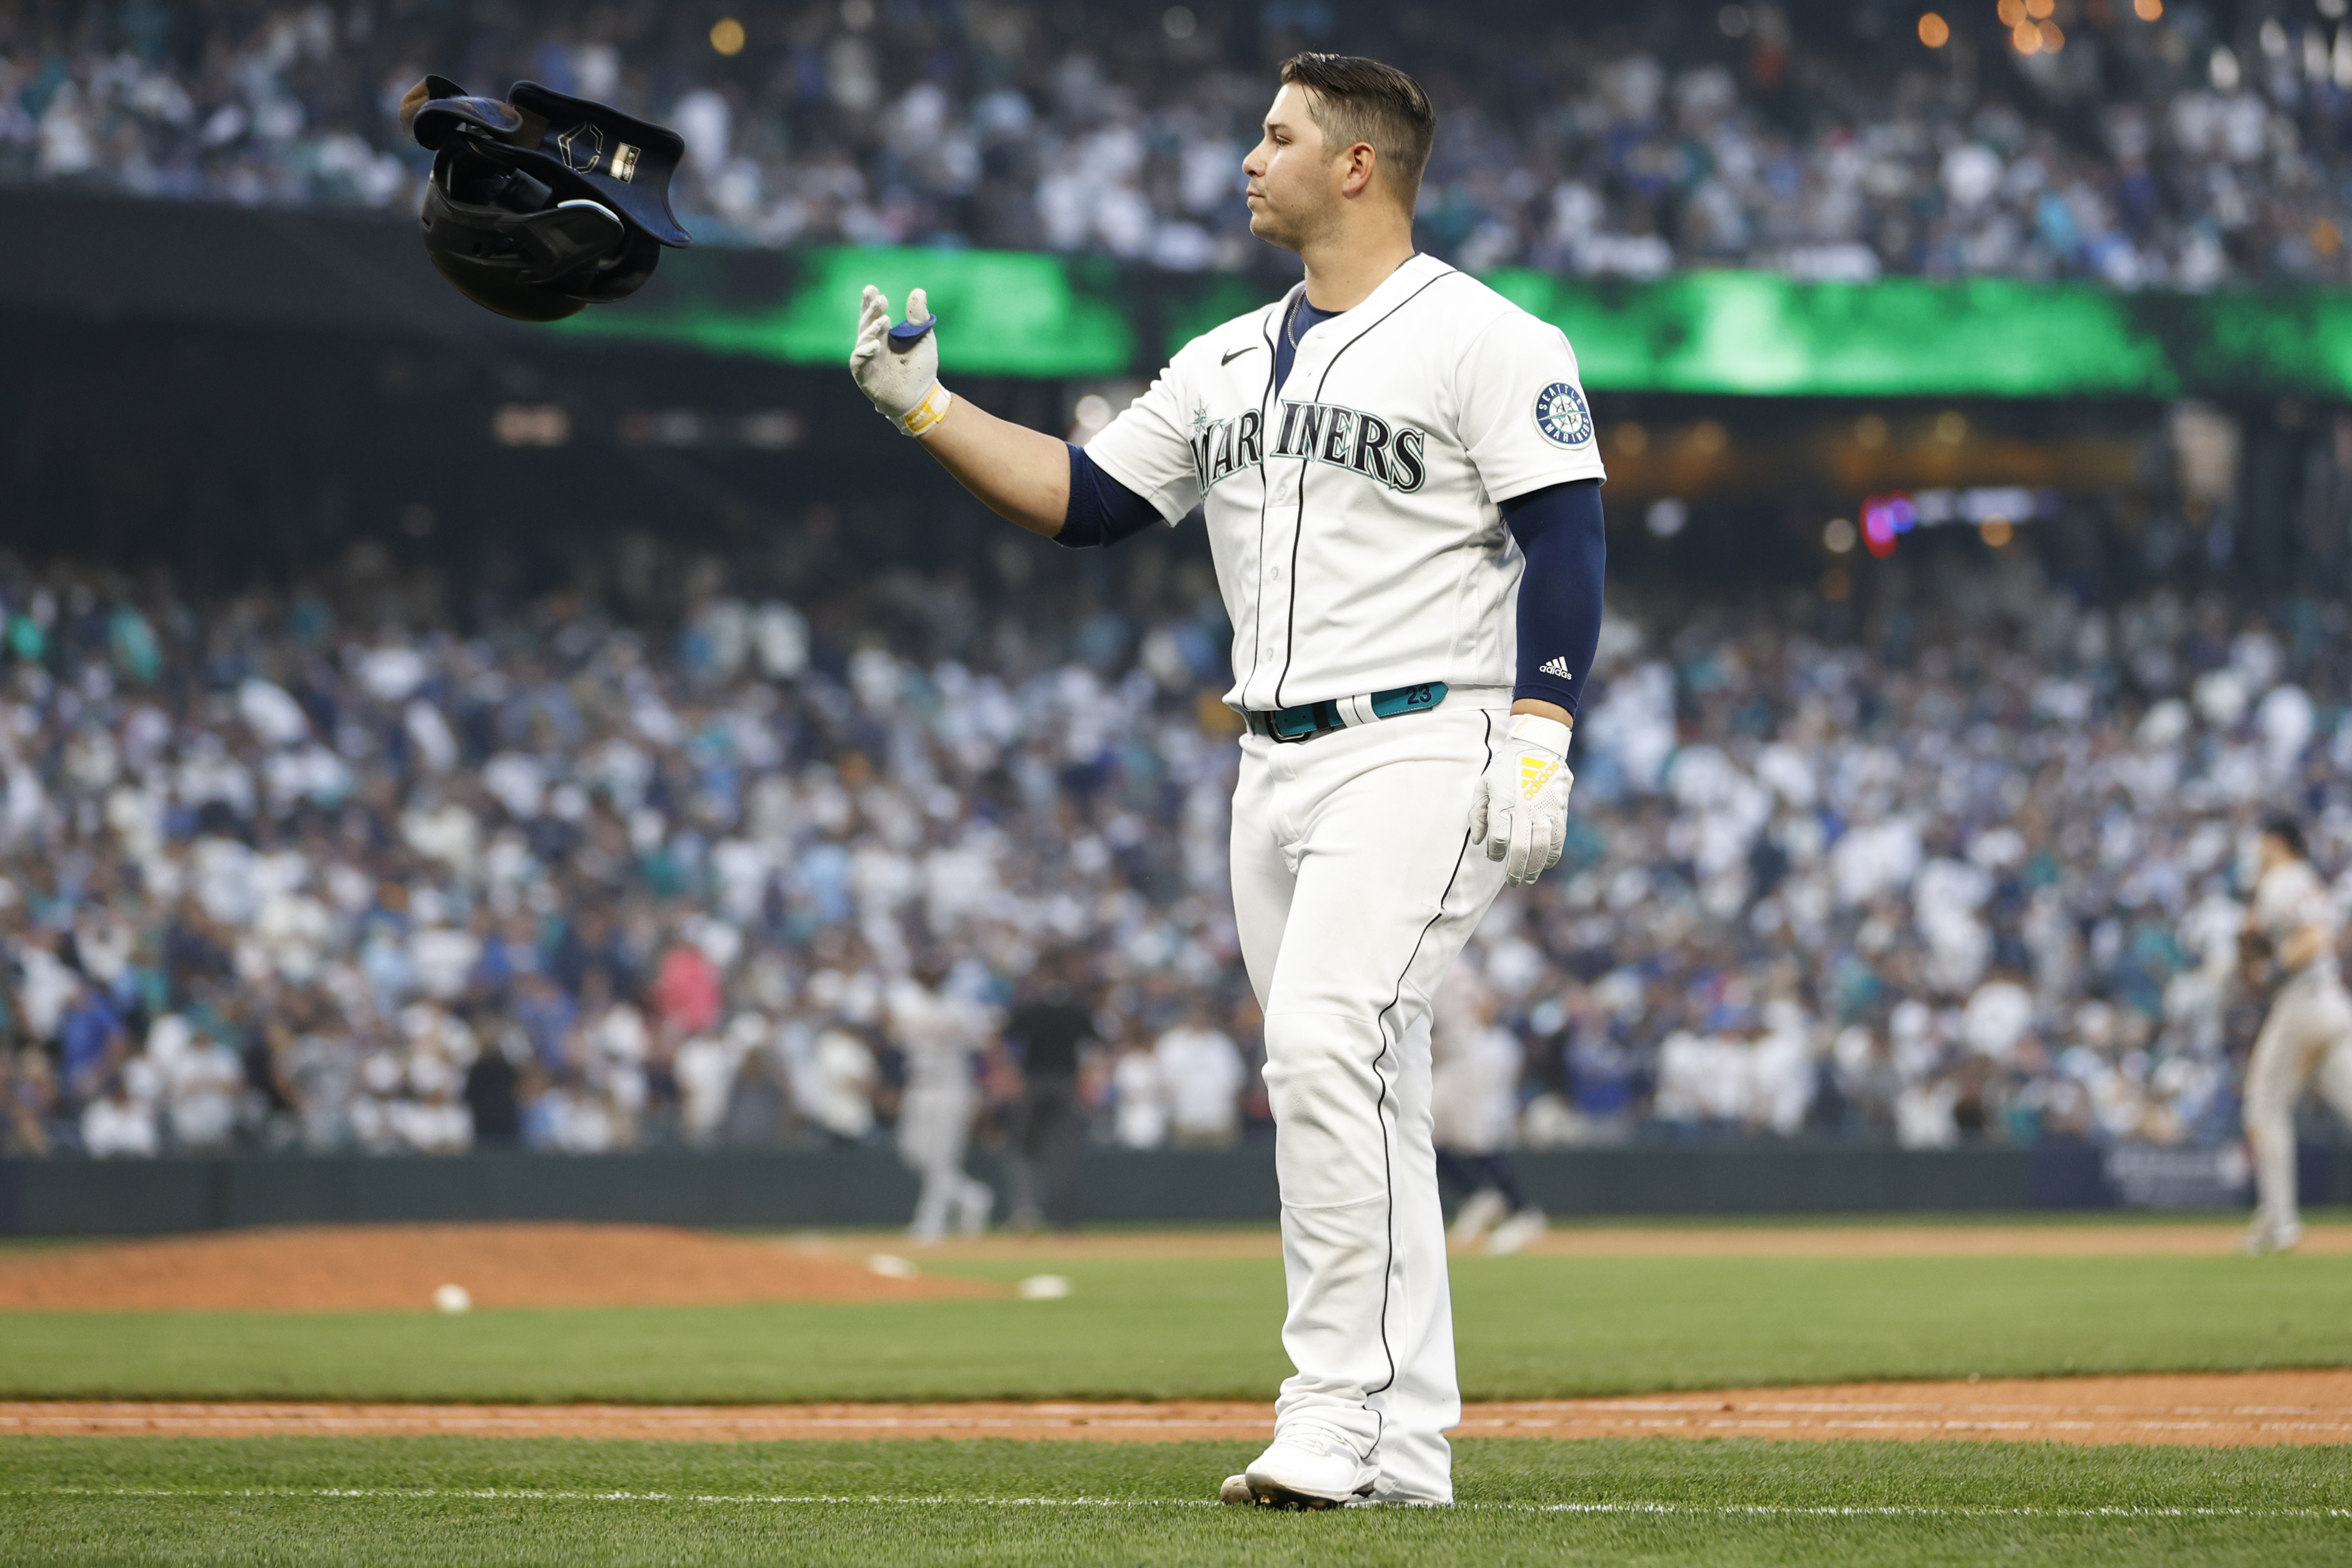 Mariners fall 6-4 to Astros in first matchup since last season's playoff  defeat – KIRO 7 News Seattle